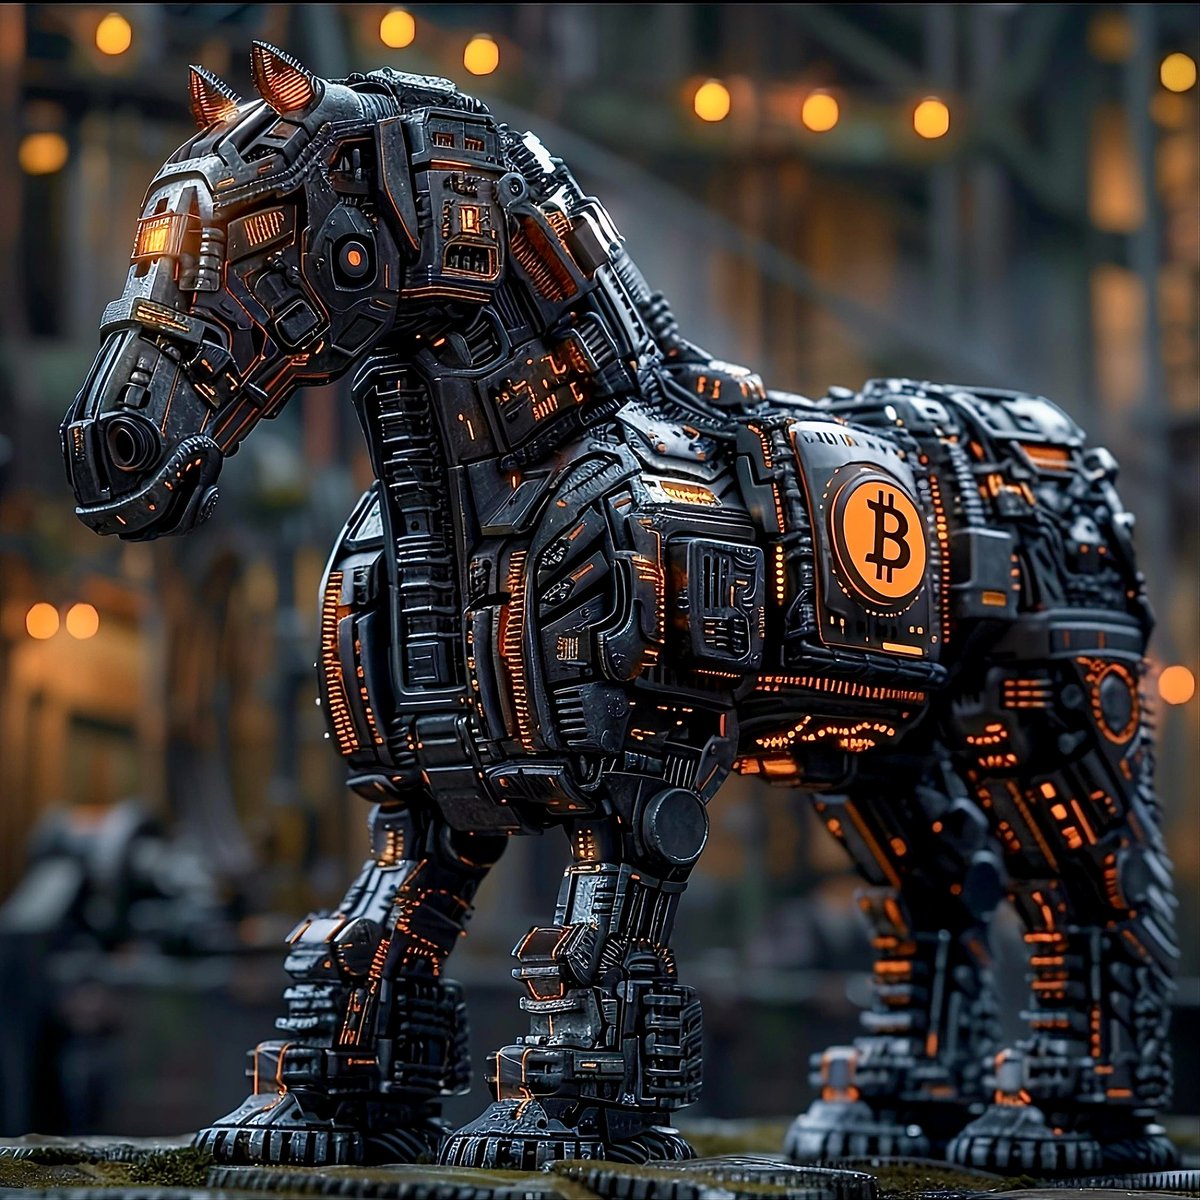 “Dollar-denominated #Bitcoin price gains are the Trojan Horse for the demise of the dollar. Those who understand this buy and hodl.” -@Breedlove22